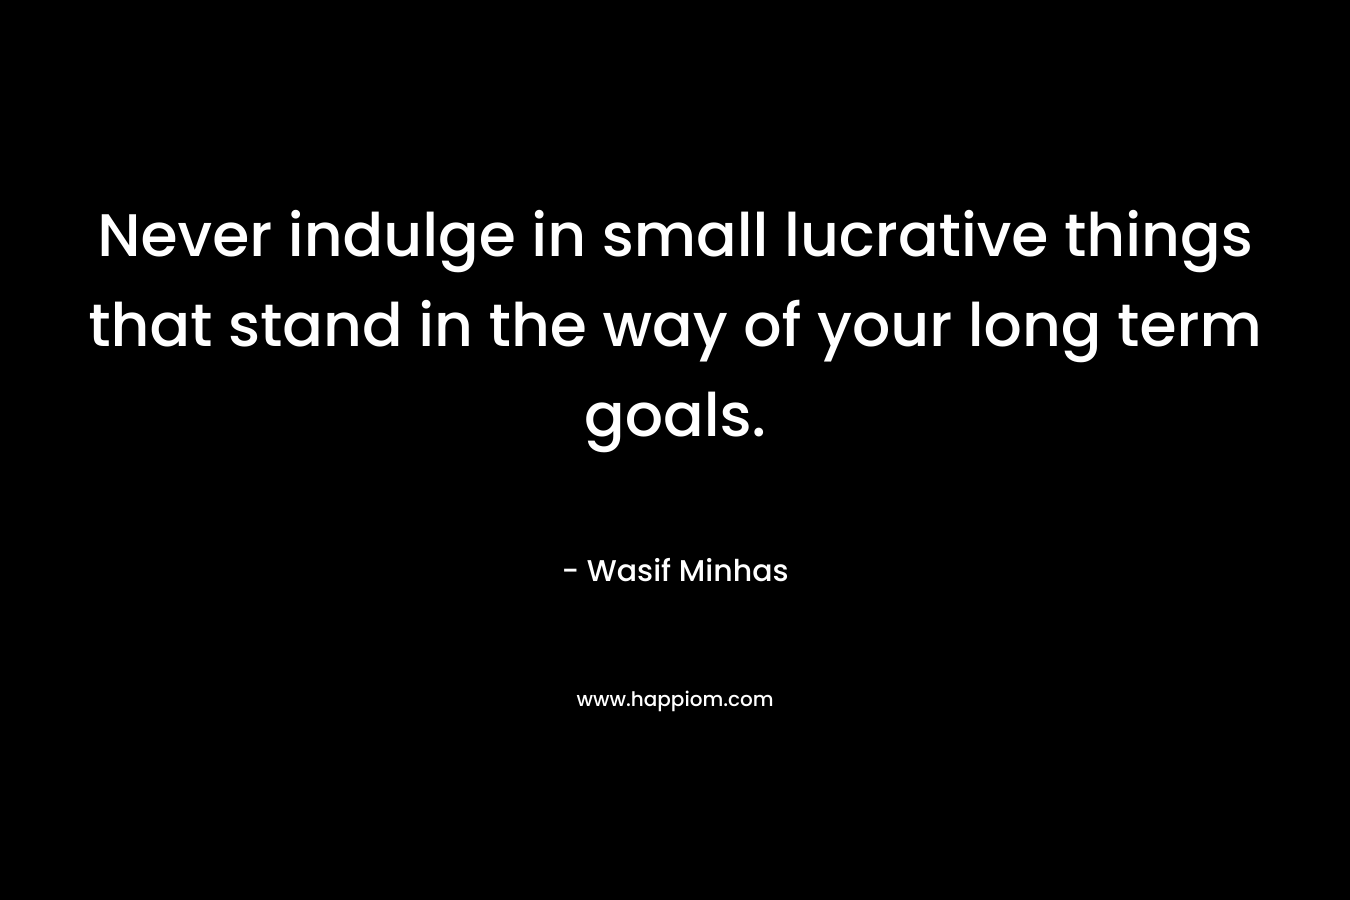 Never indulge in small lucrative things that stand in the way of your long term goals.